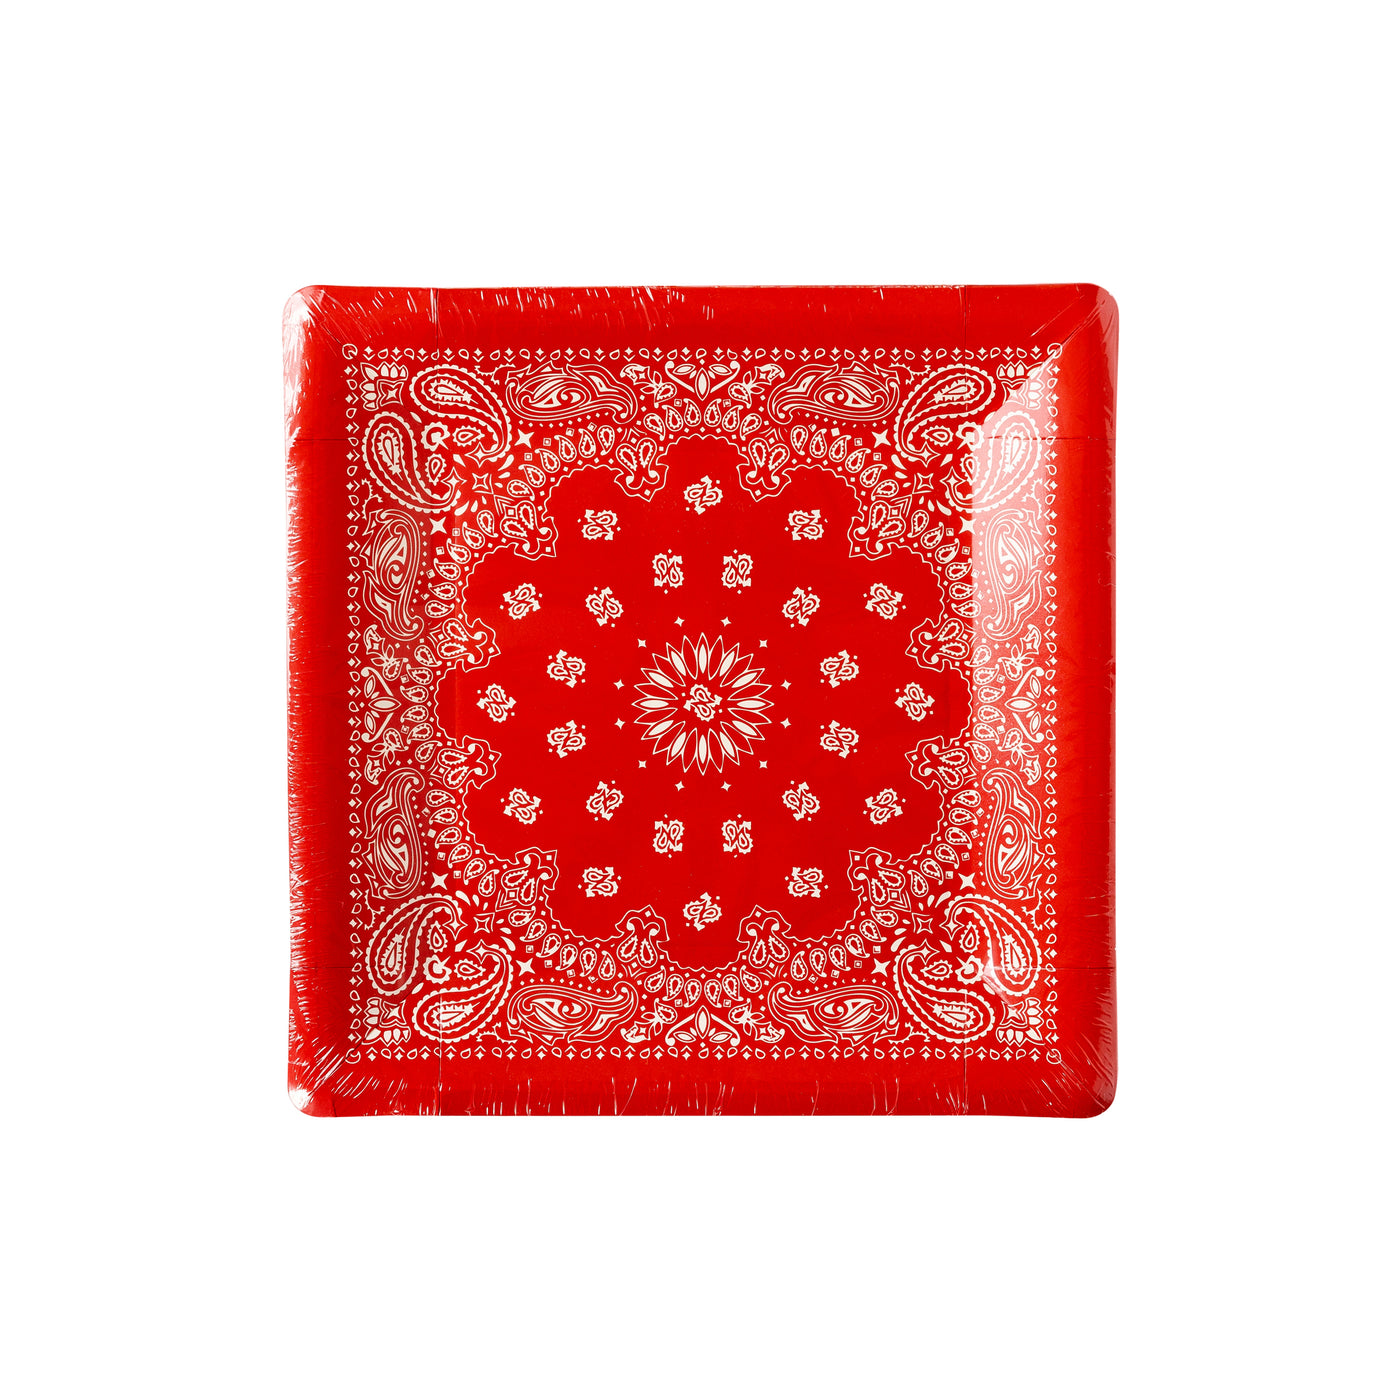 PLTS366S-MME - Red Bandana Paper Plate